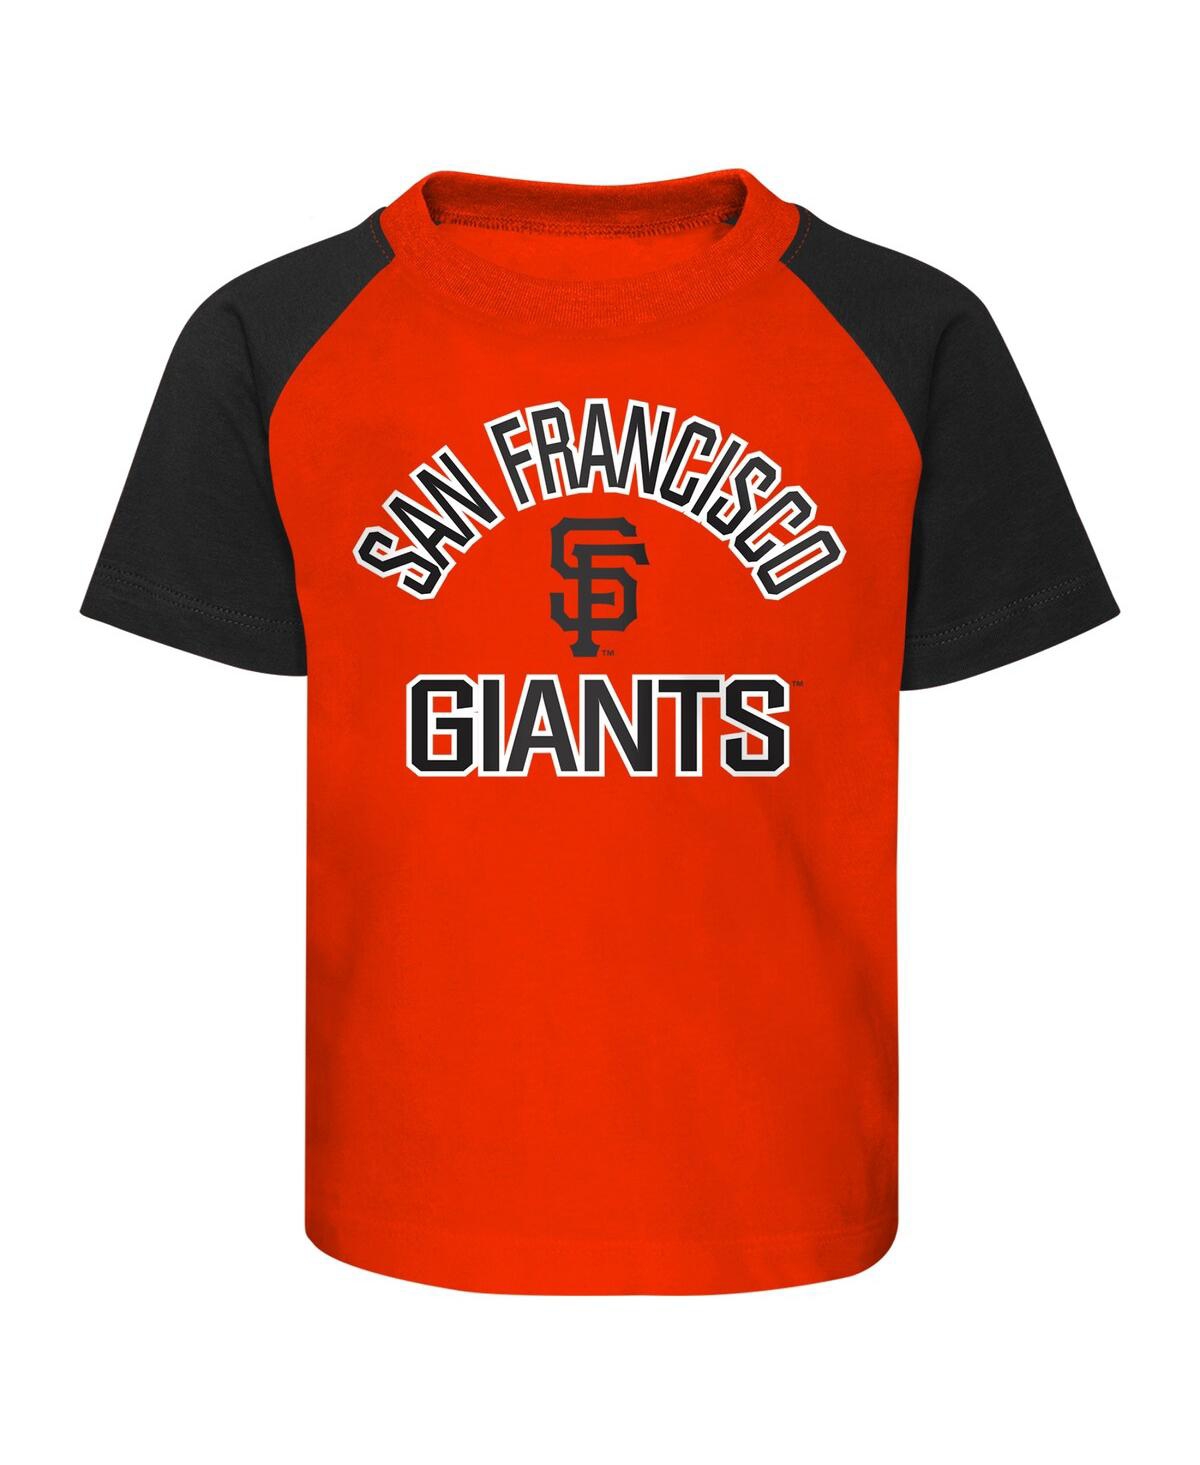 Shop Outerstuff Infant Boys And Girls Orange And Heather Gray San Francisco Giants Ground Out Baller Raglan T-shirt  In Orange,heather Gray